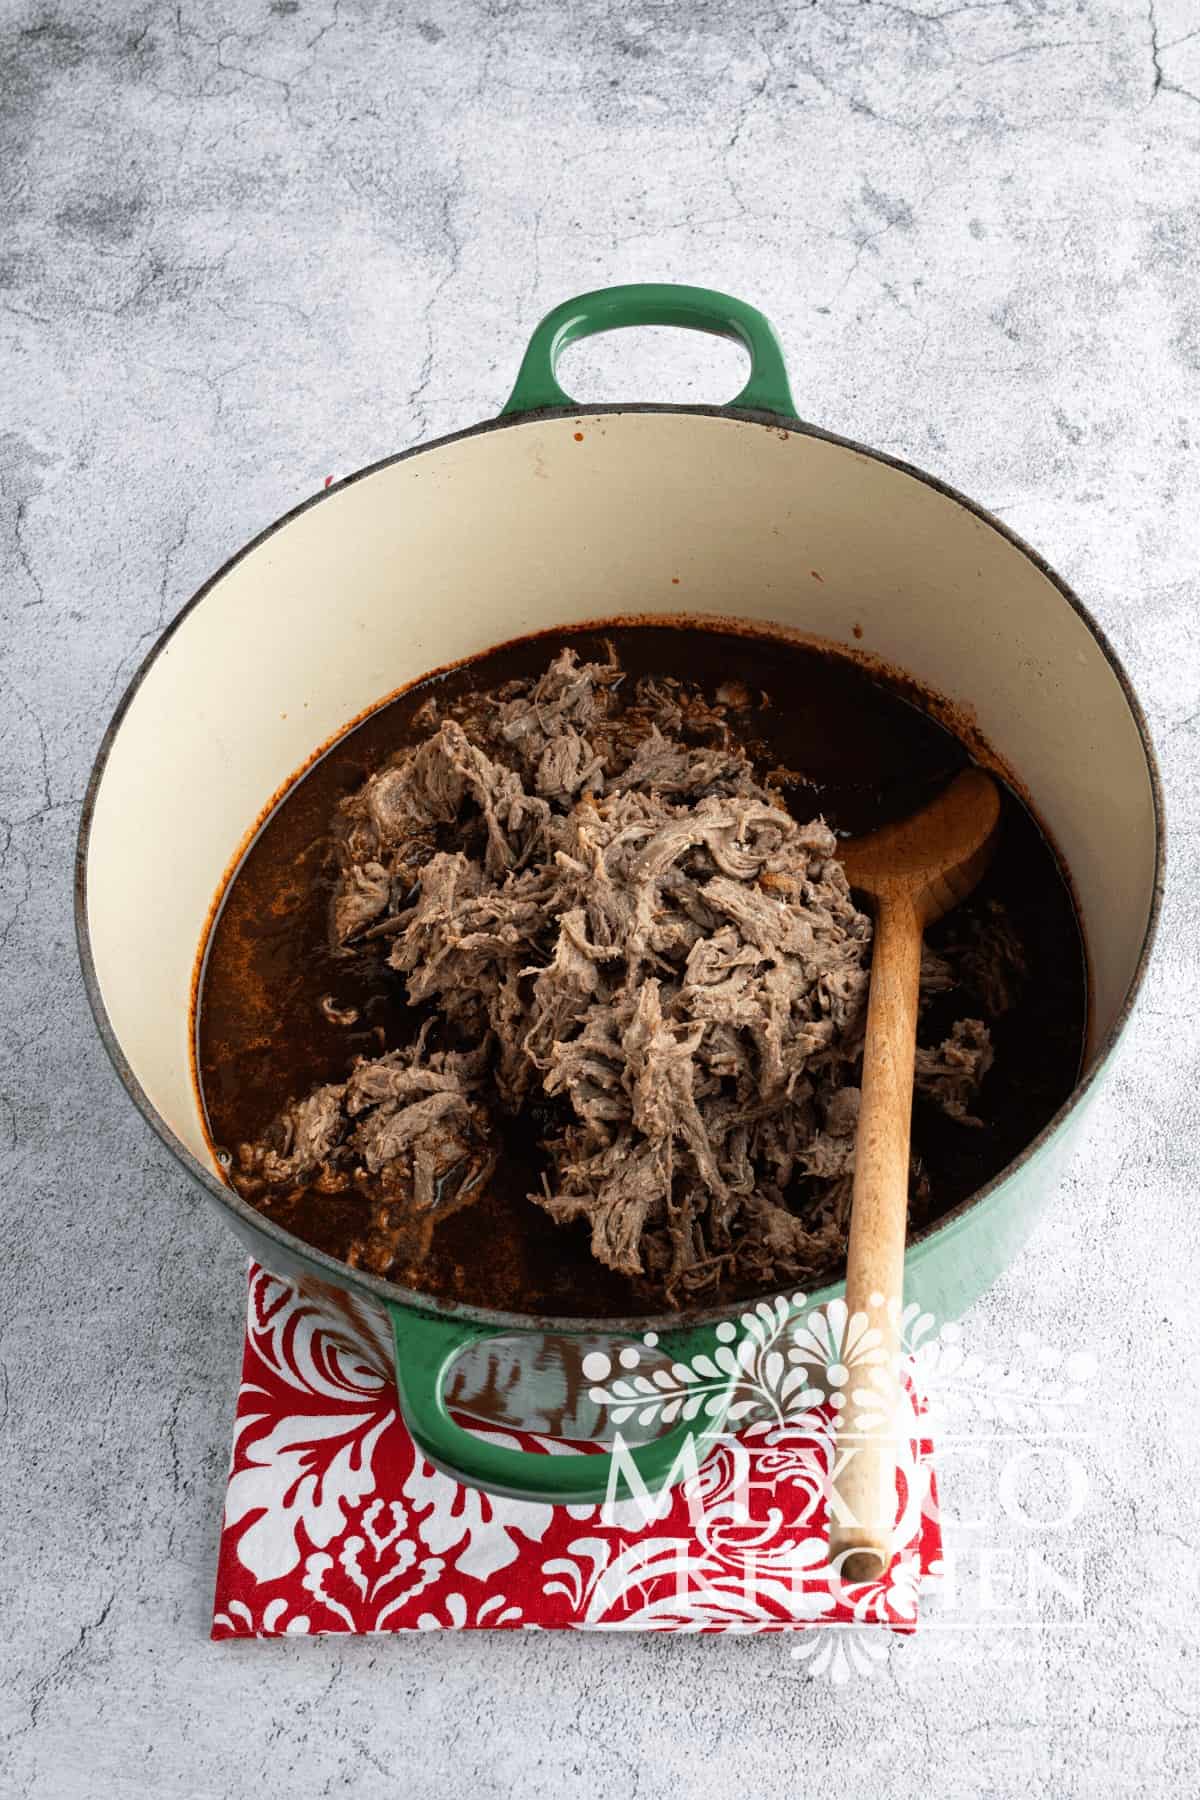 Shredded beef in a cast iron pot with sauce.